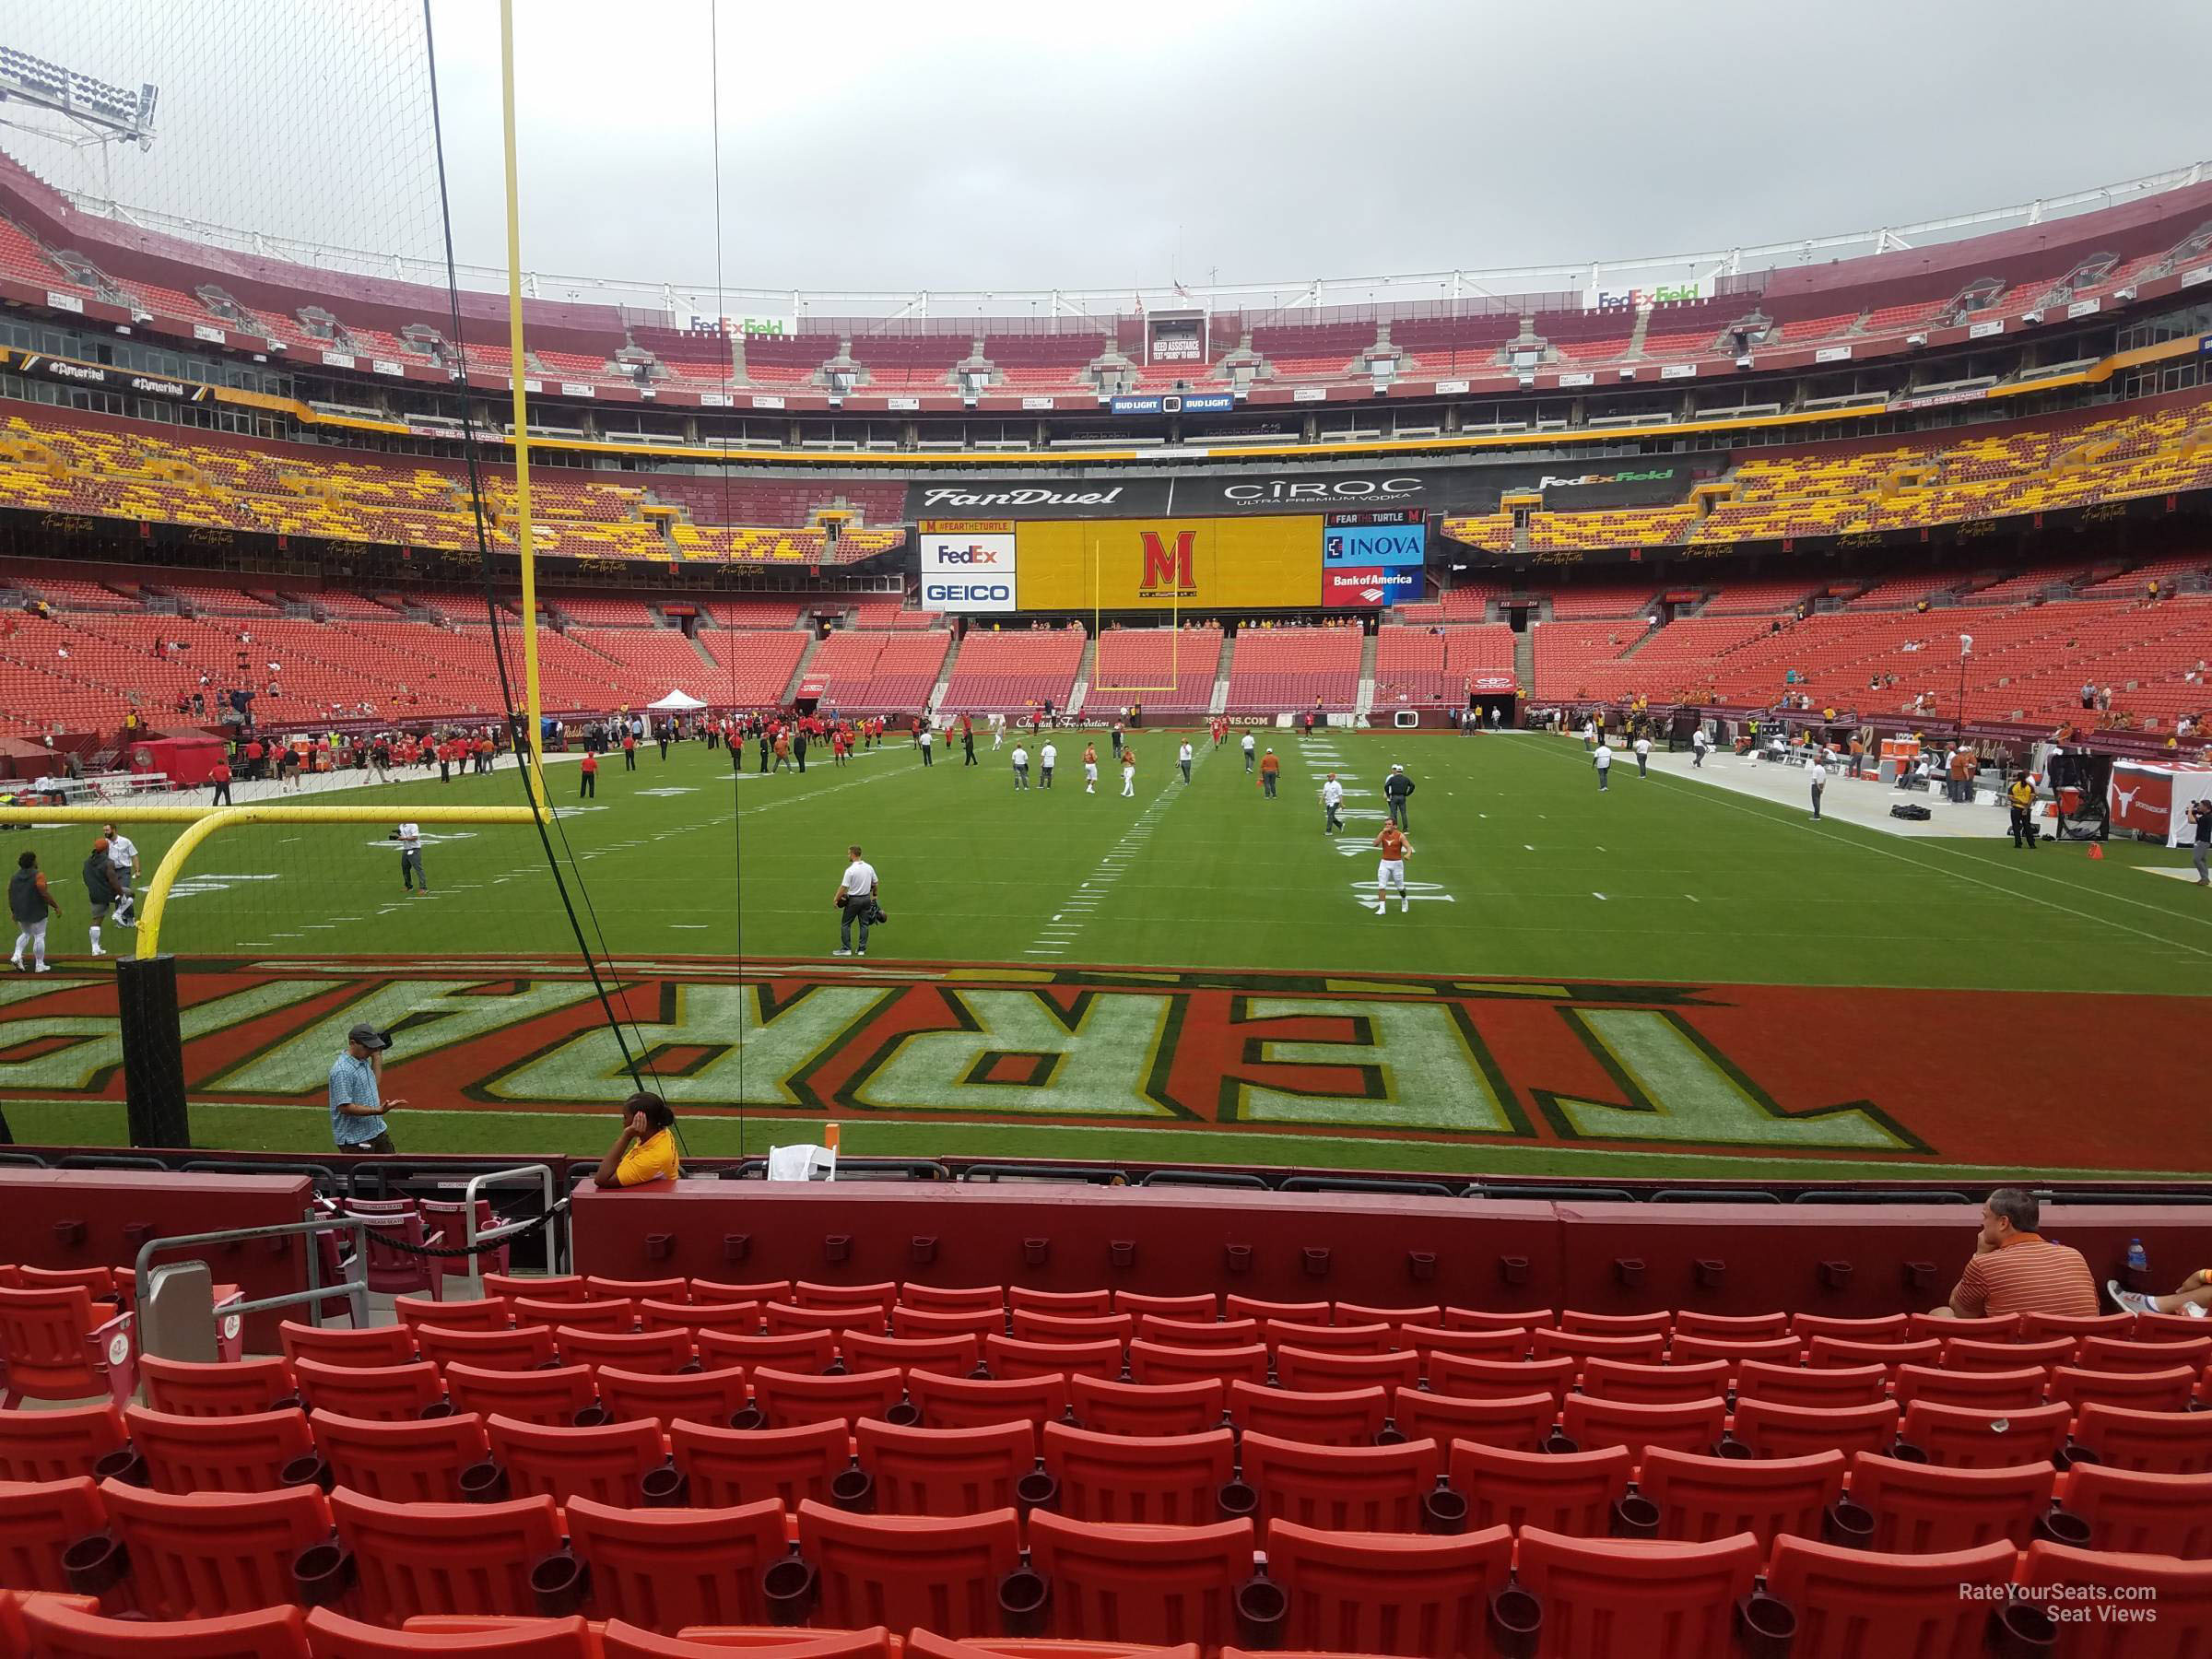 section 131, row 13 seat view  - fedexfield